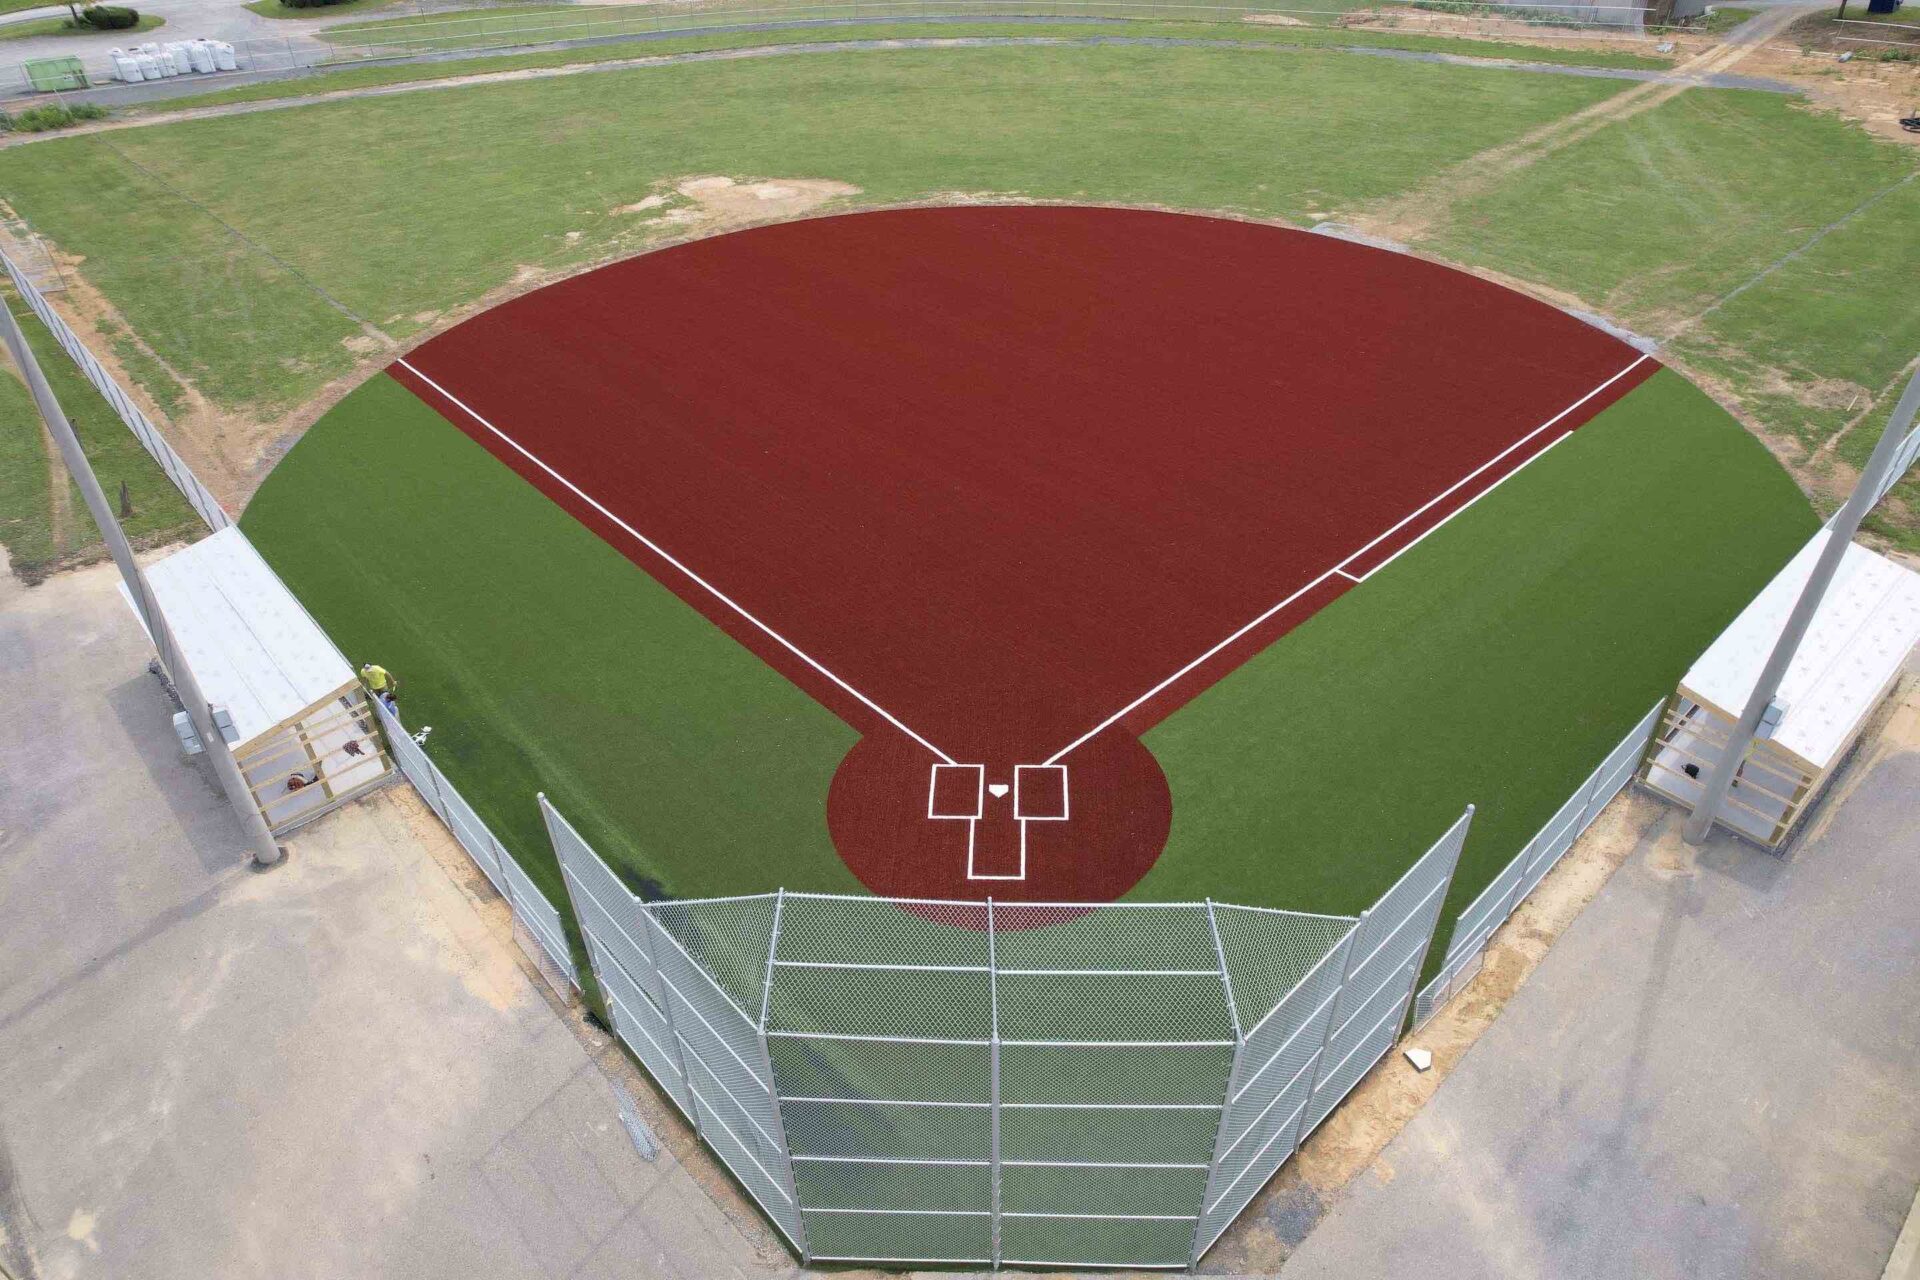 Aerial view of an empty baseball field with red and green artificial turf, white lines, and dugouts, surrounded by a chain link fence.